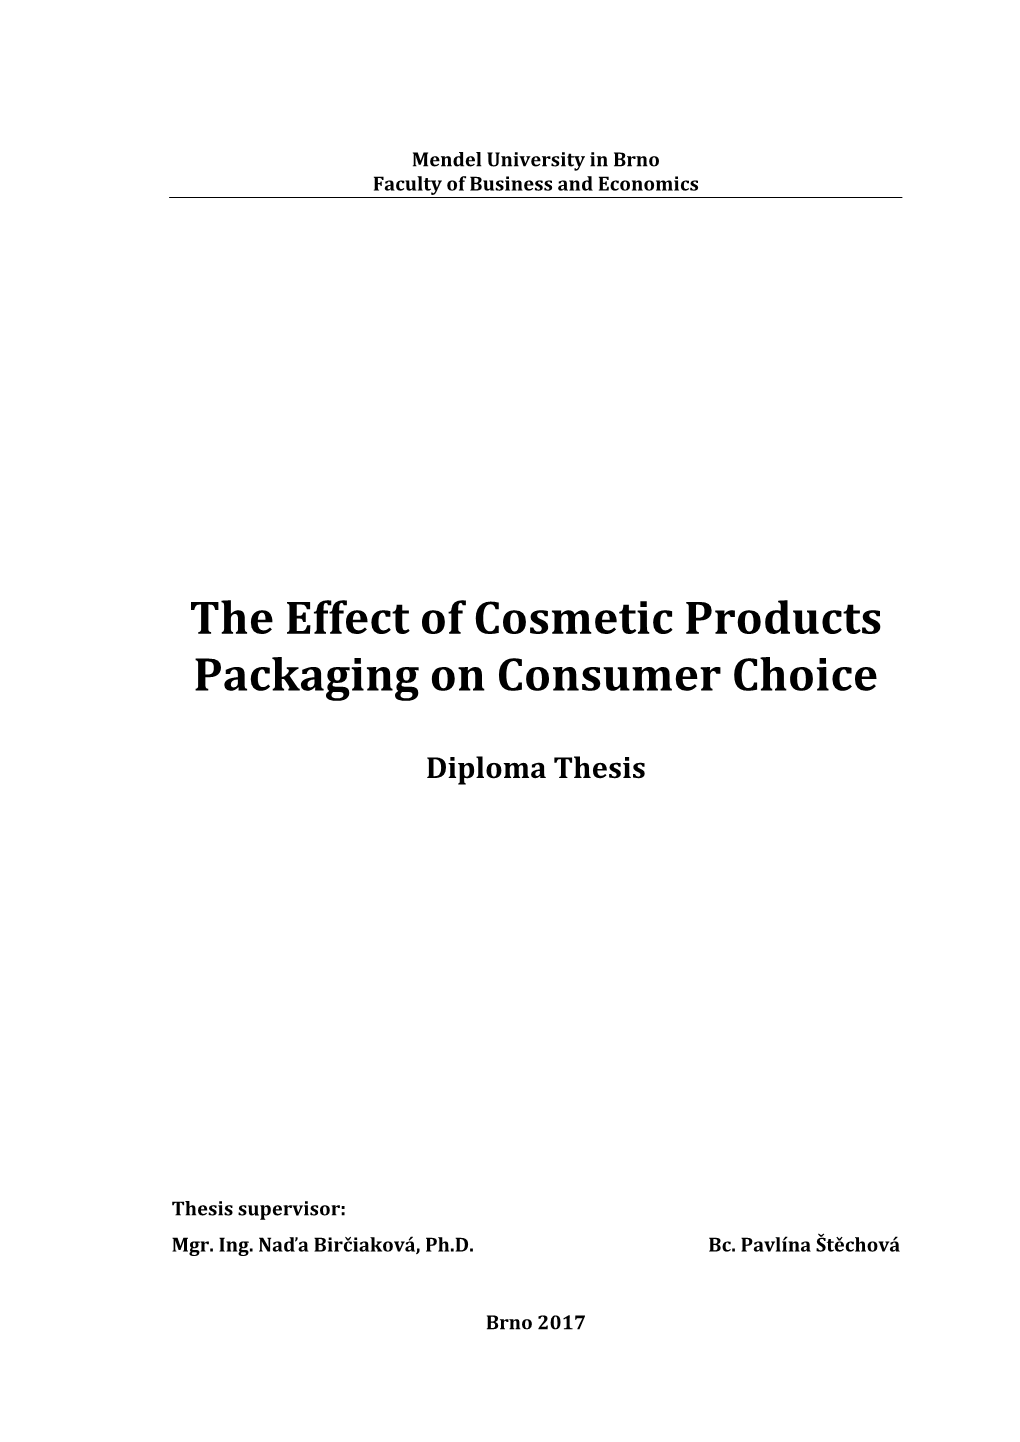 The Effect of Cosmetic Products Packaging on Consumer Choice